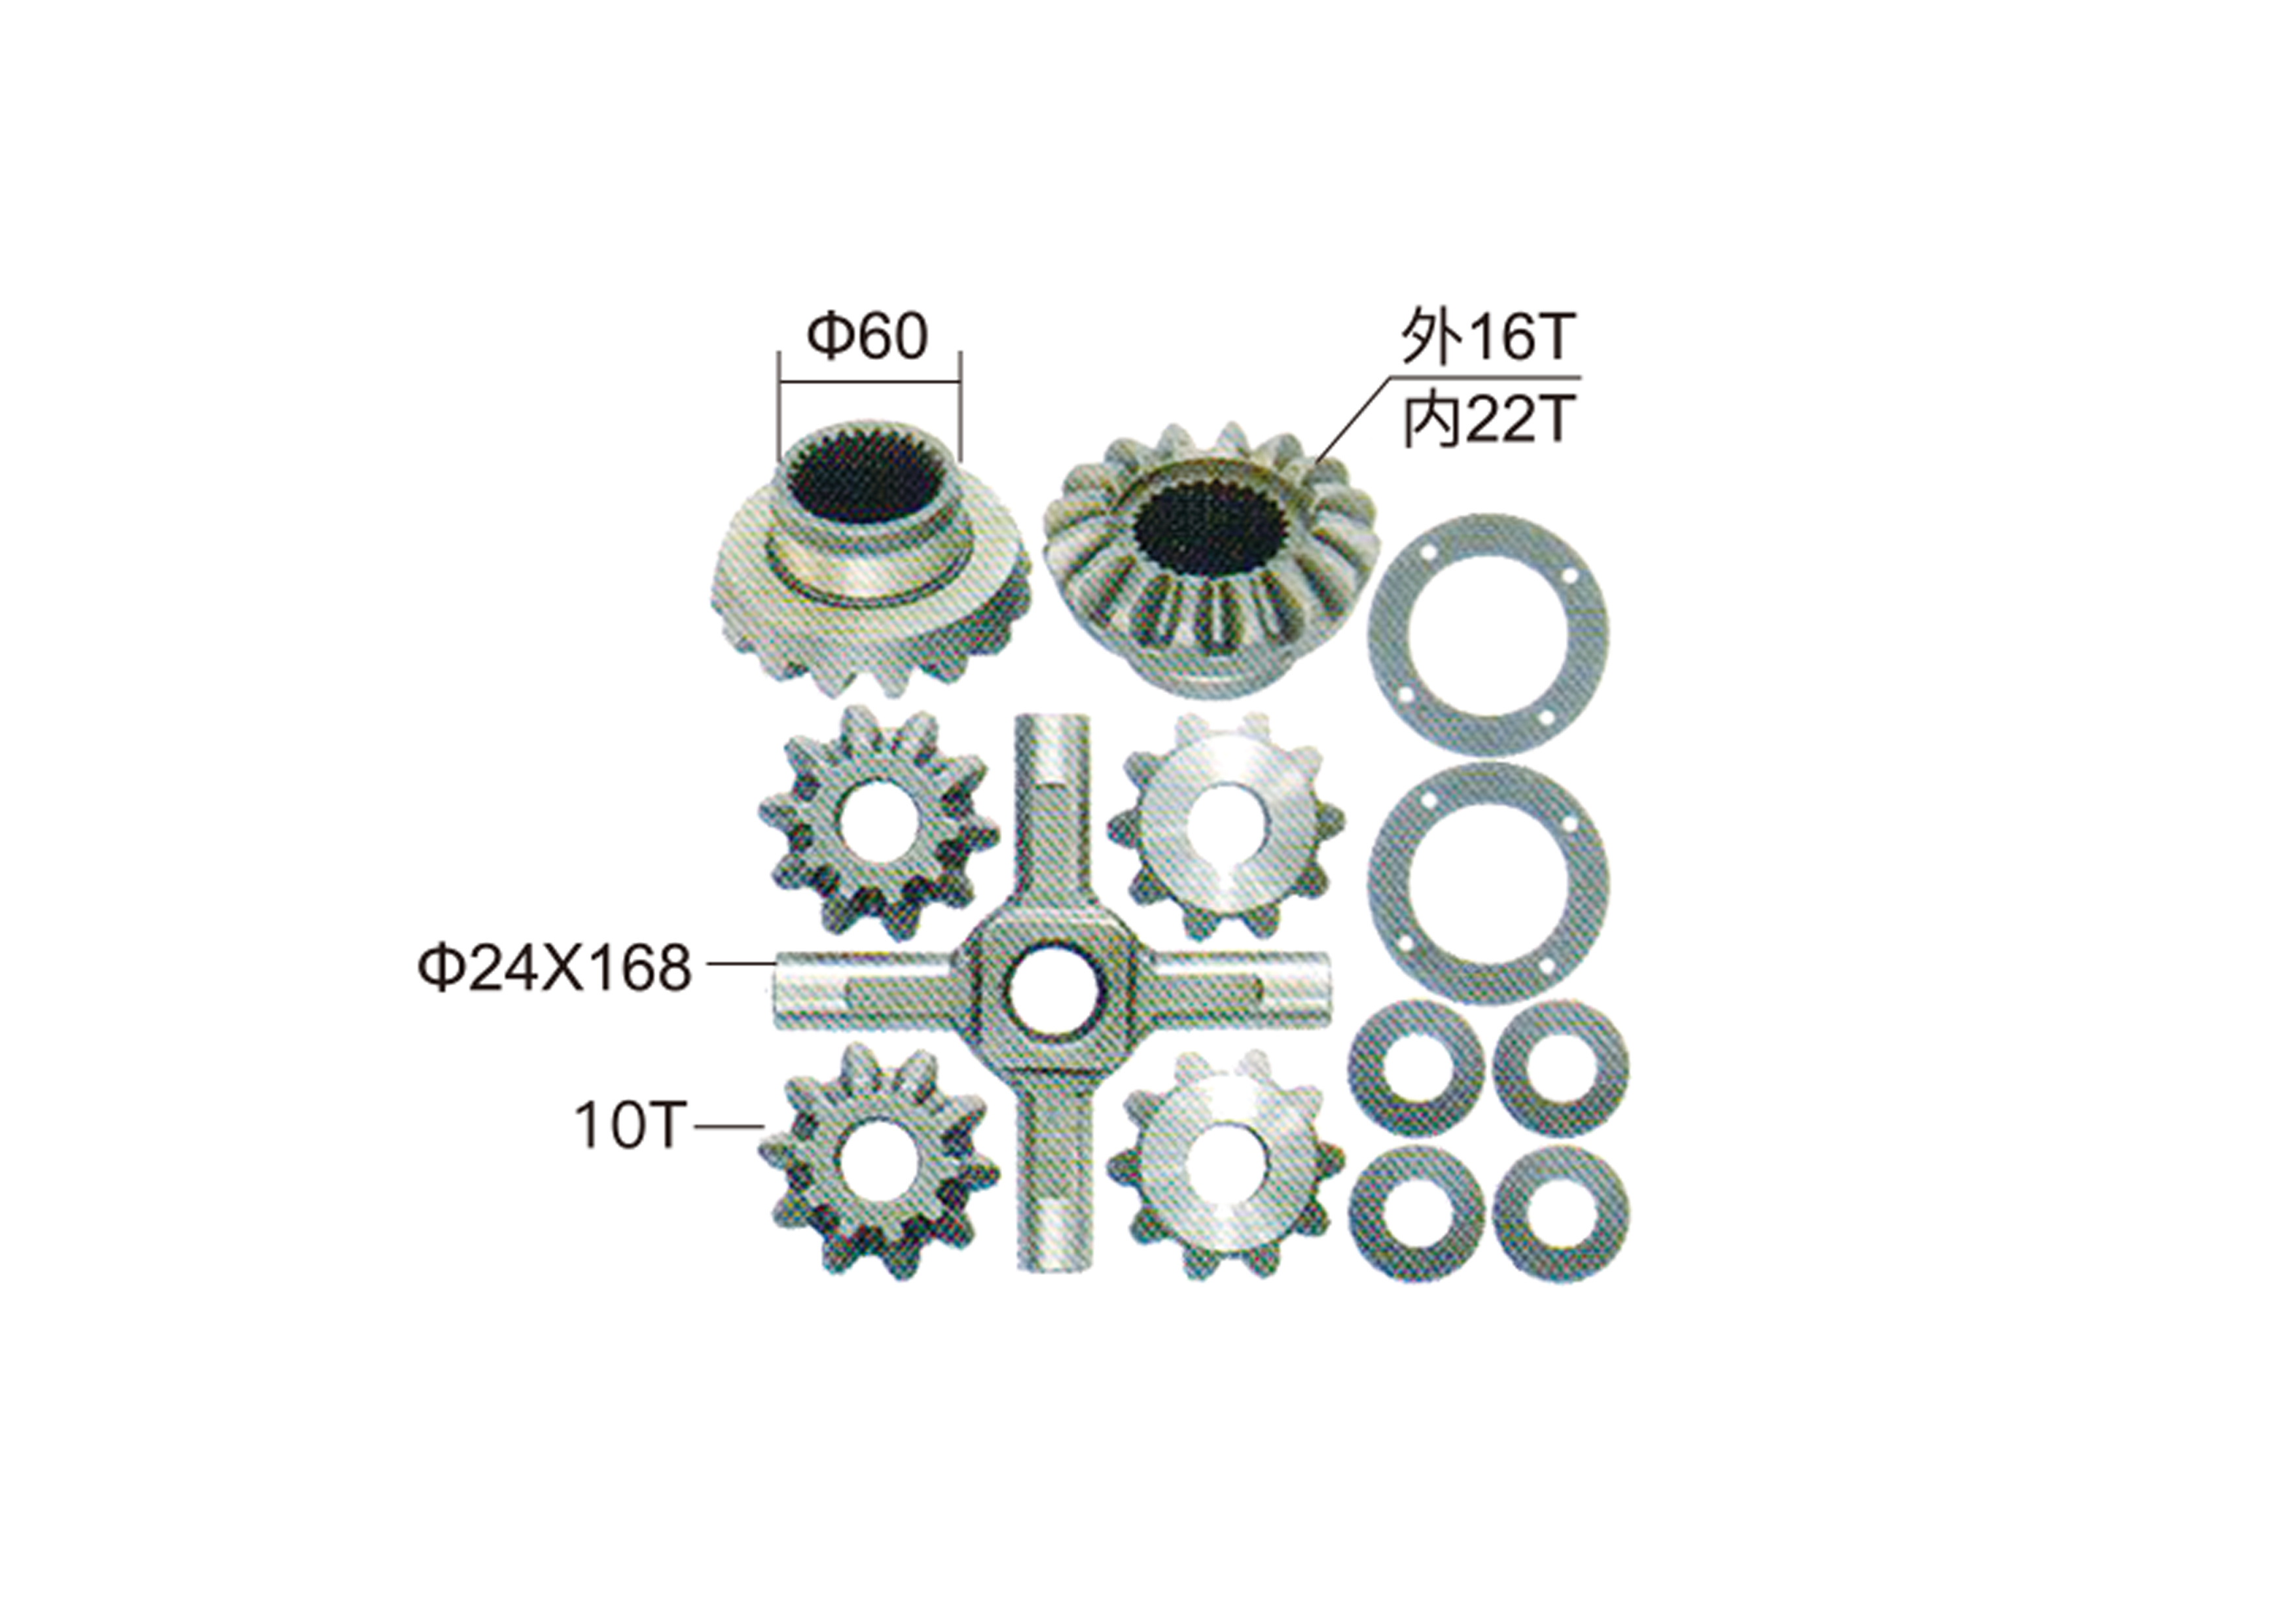 Differential Planetary Set For Hino Spider Size 24X168